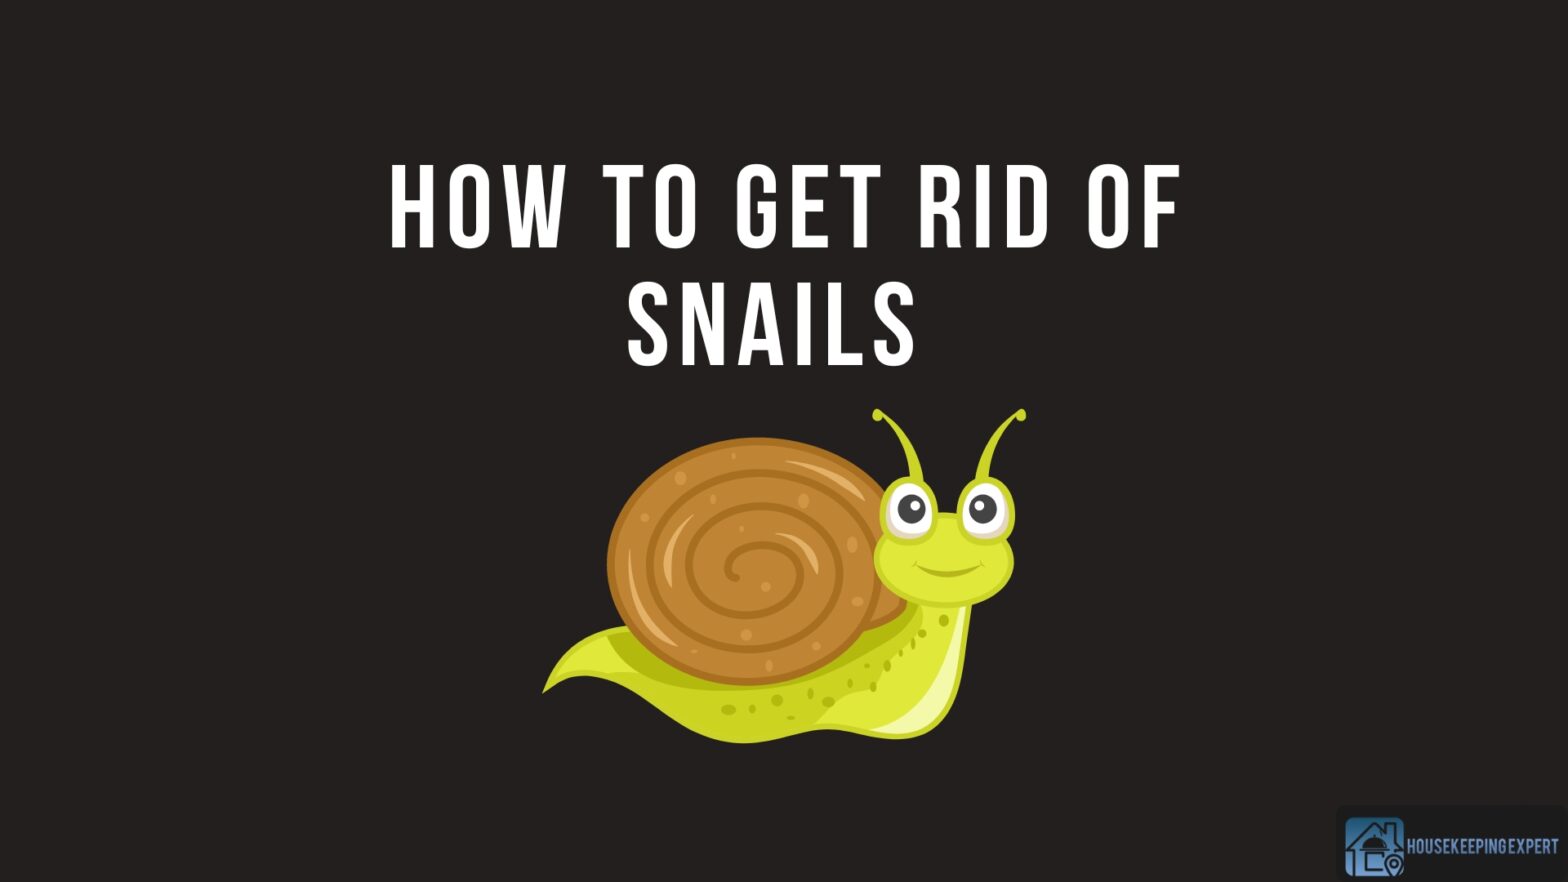 How To Get Rid Of Snails